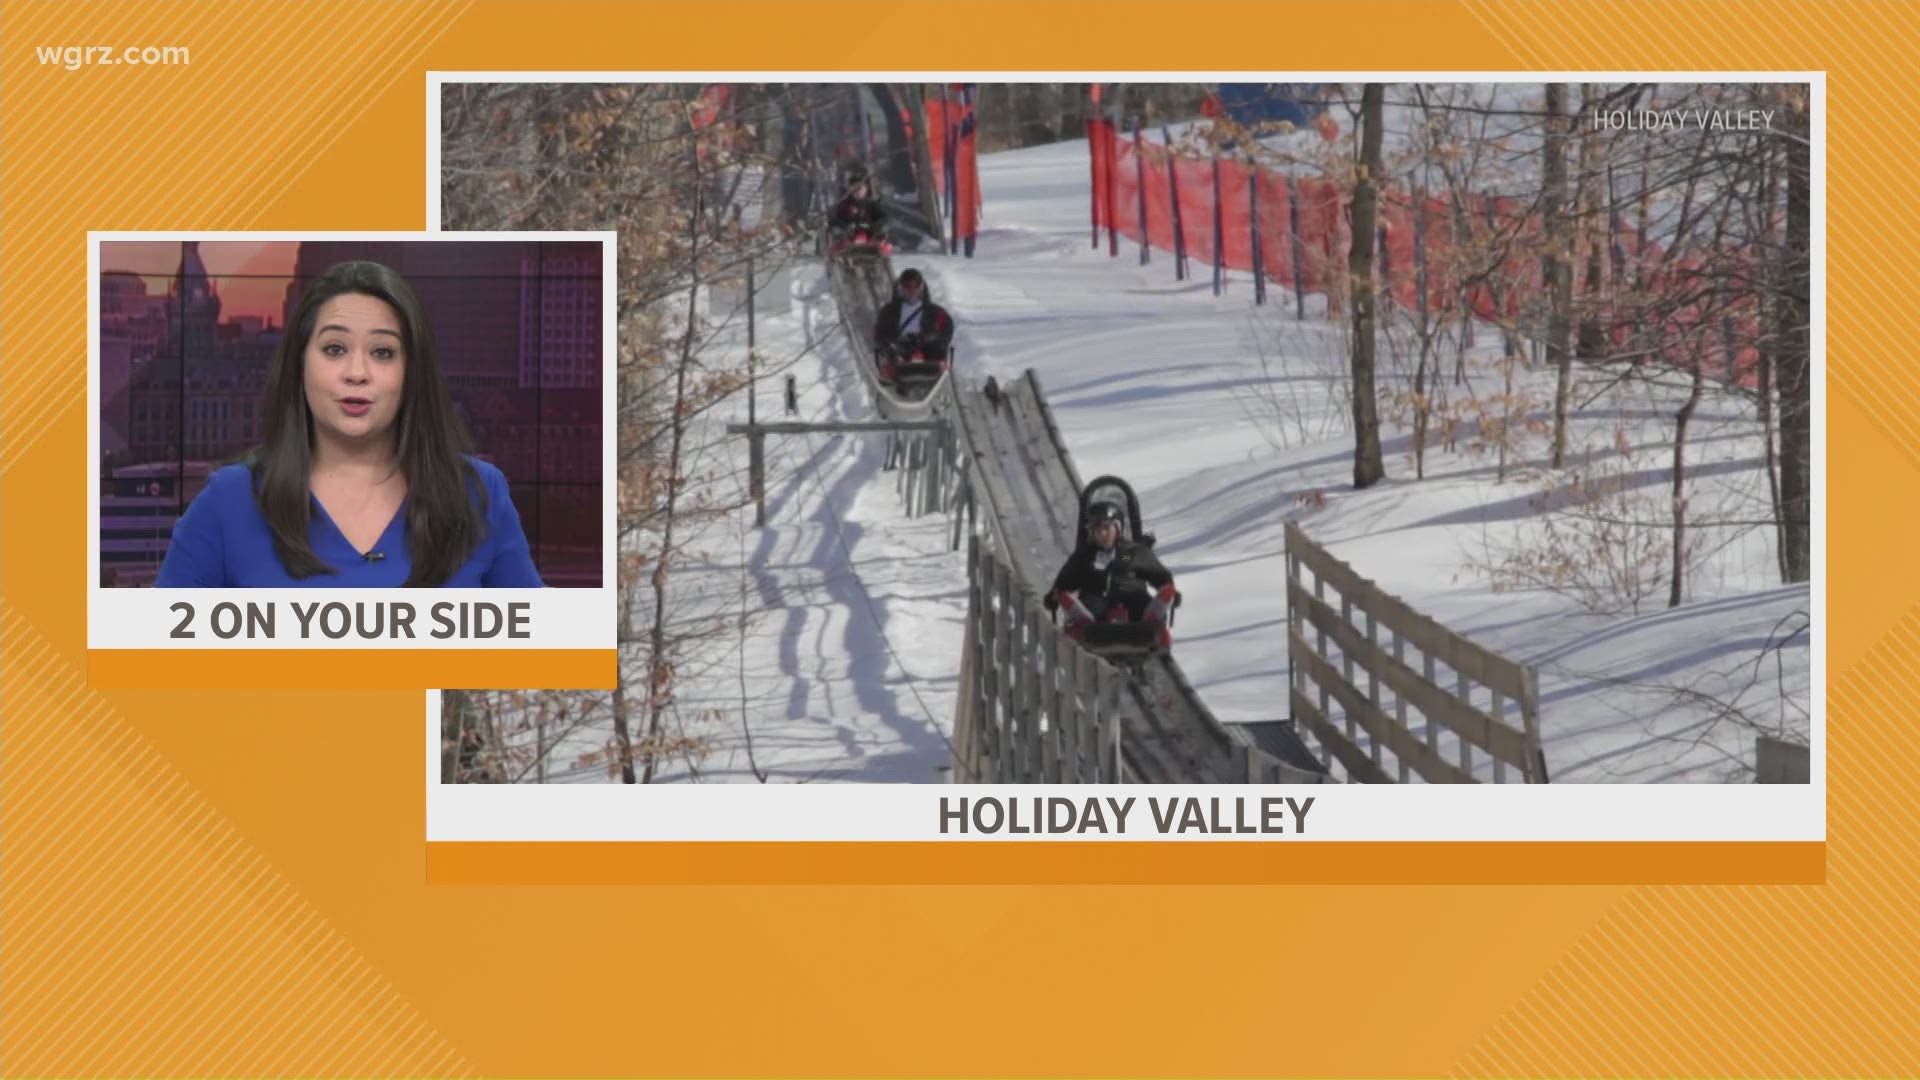 As soon as Holiday Valley has an opening date, they will announce it, but snowmaking should happen this weekend.